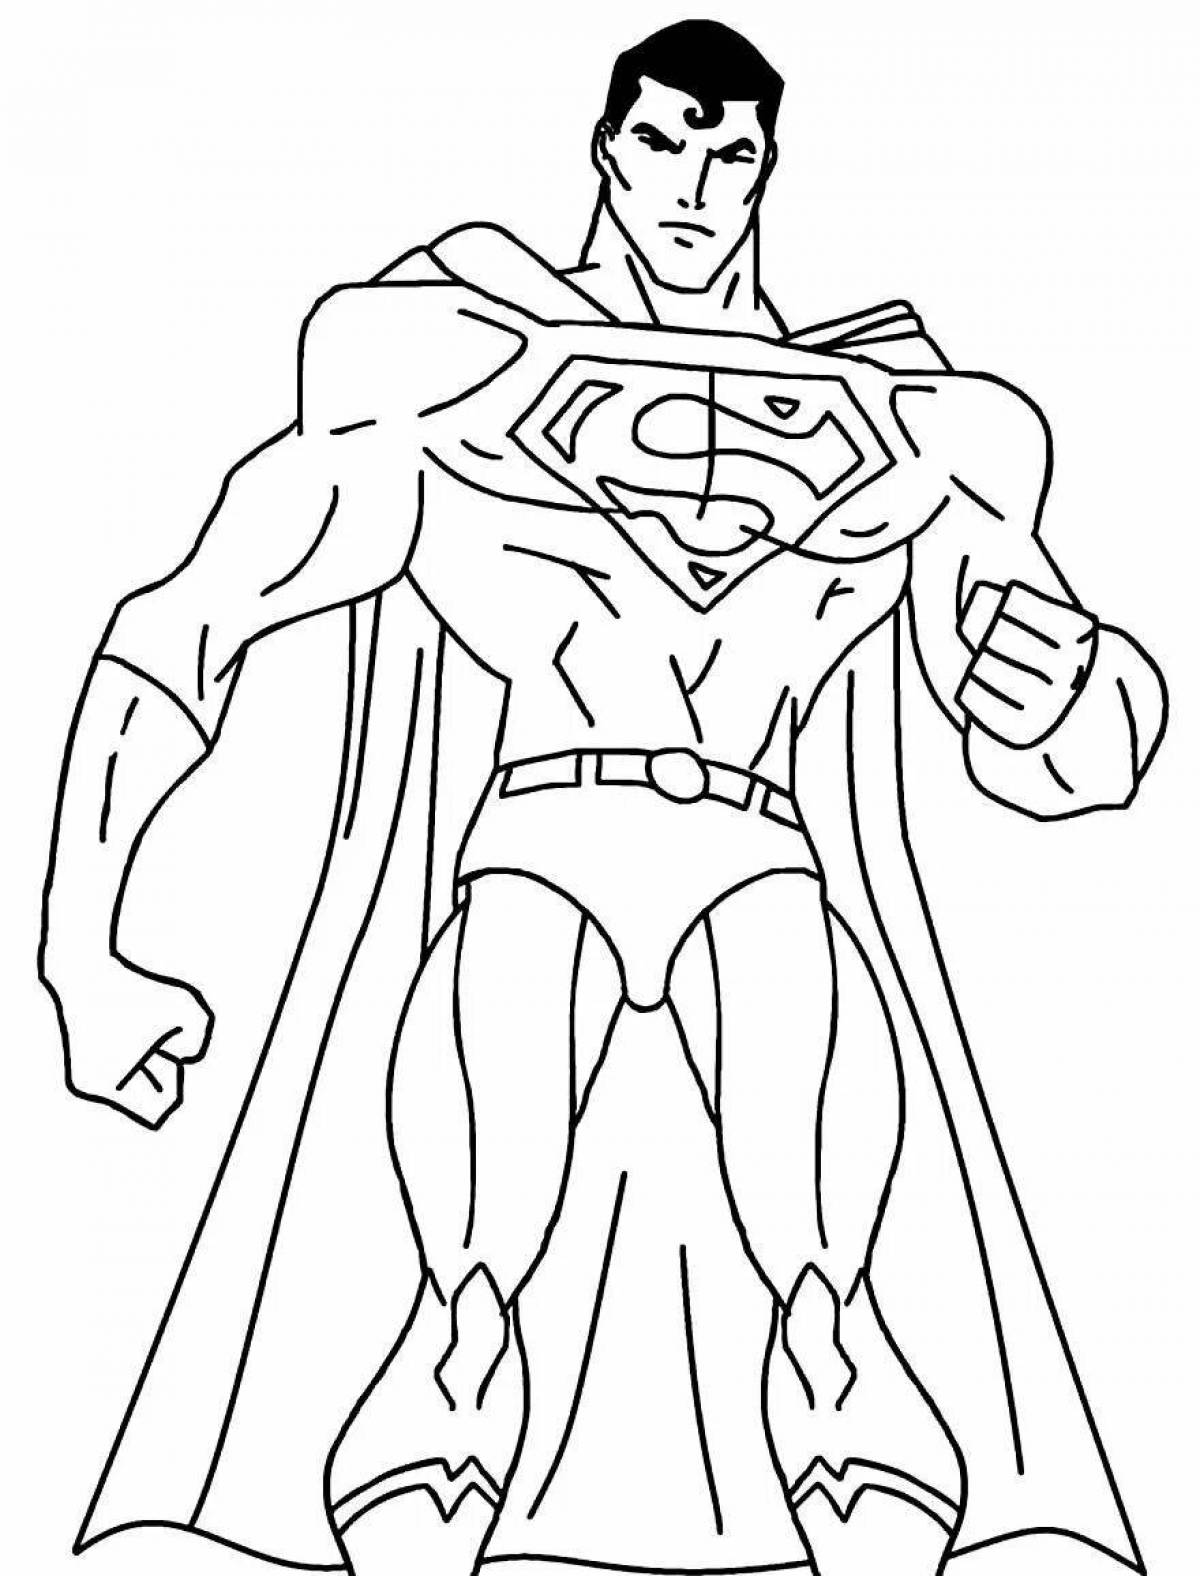 Superman fun coloring book for kids 3-4 years old